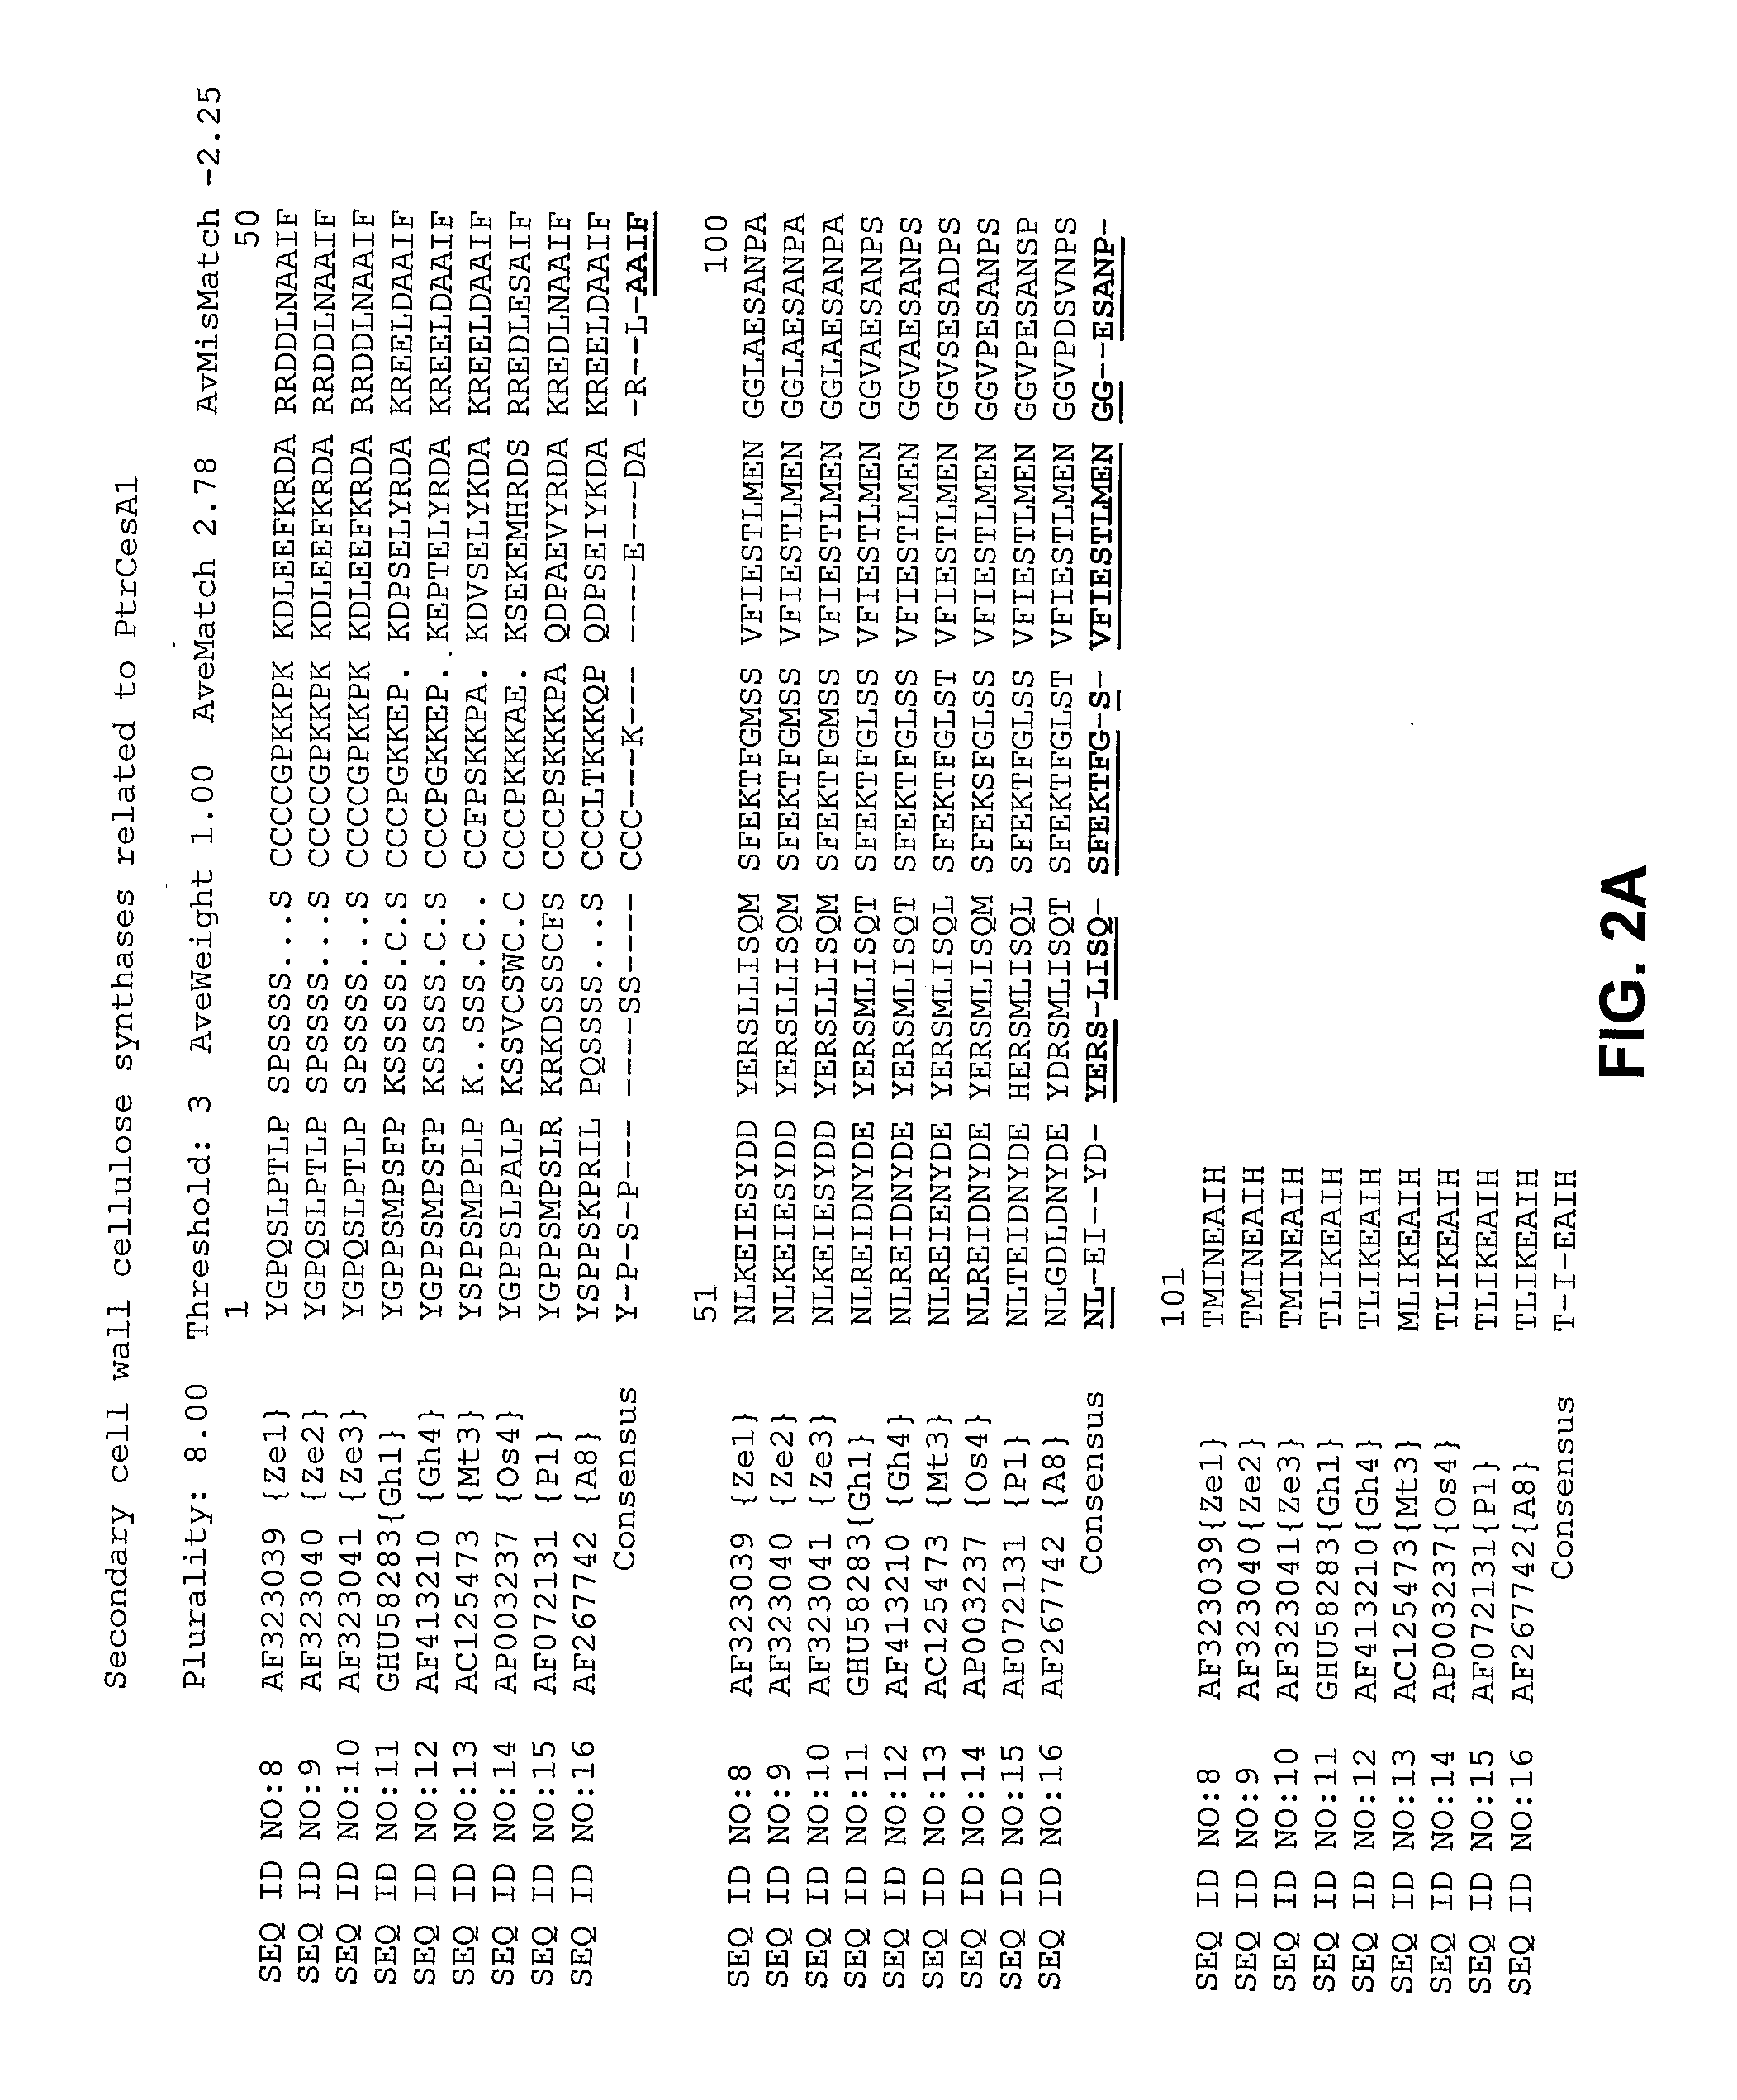 Methods for Enhancing Expression of Secondary Cell Wall Cellulose Synthases in Plants